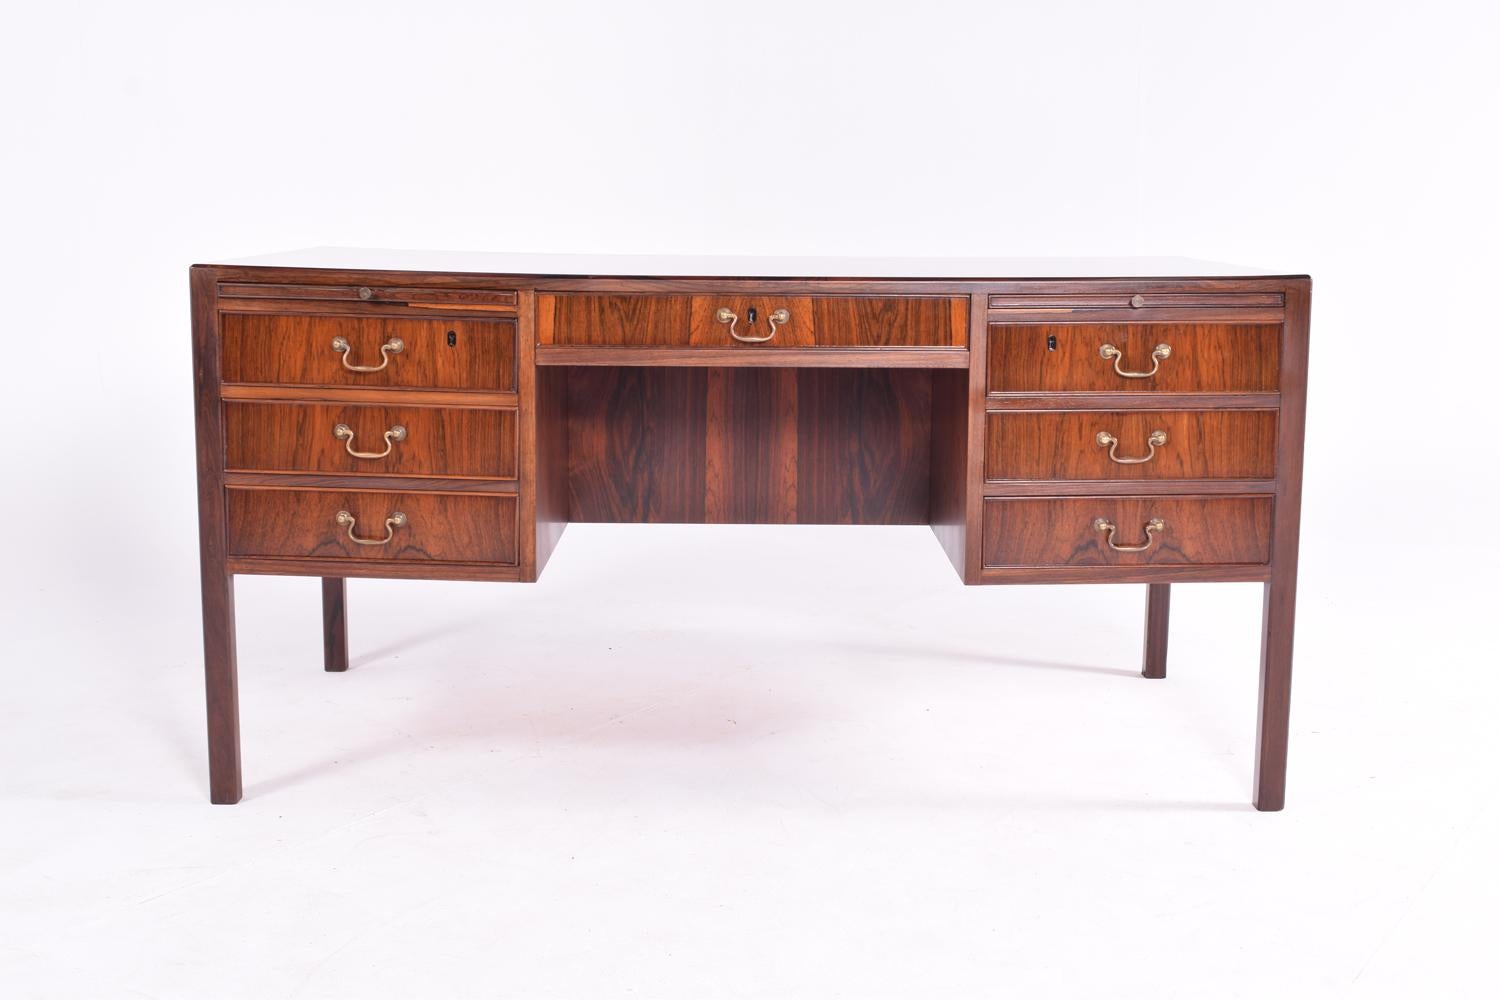 Danish desk of good proportions with elegant brass handles on drawers with extension slides, all in rosewood. The other side with book shelf. Straight square legs.